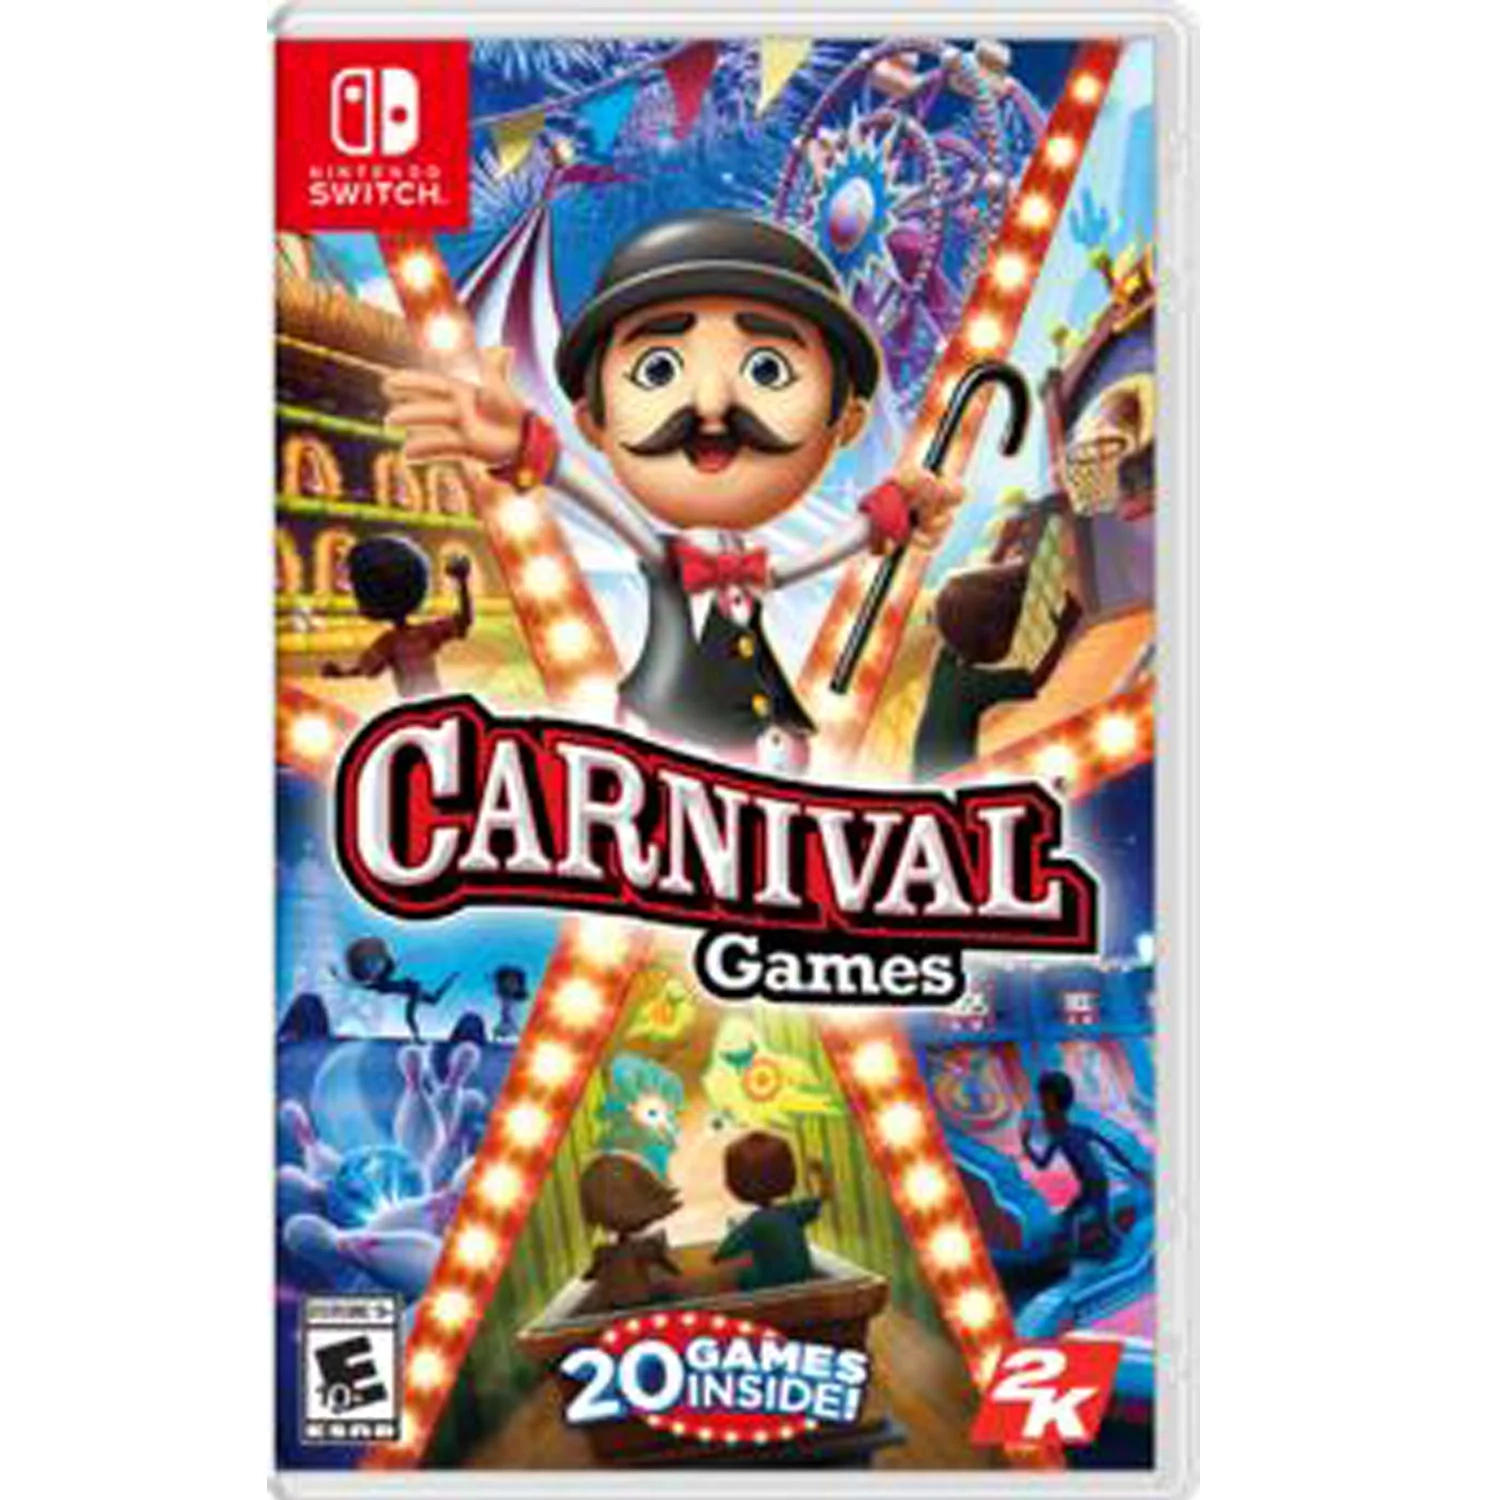 Carnival Games for Nintendo Switch [VIDEOGAMES]